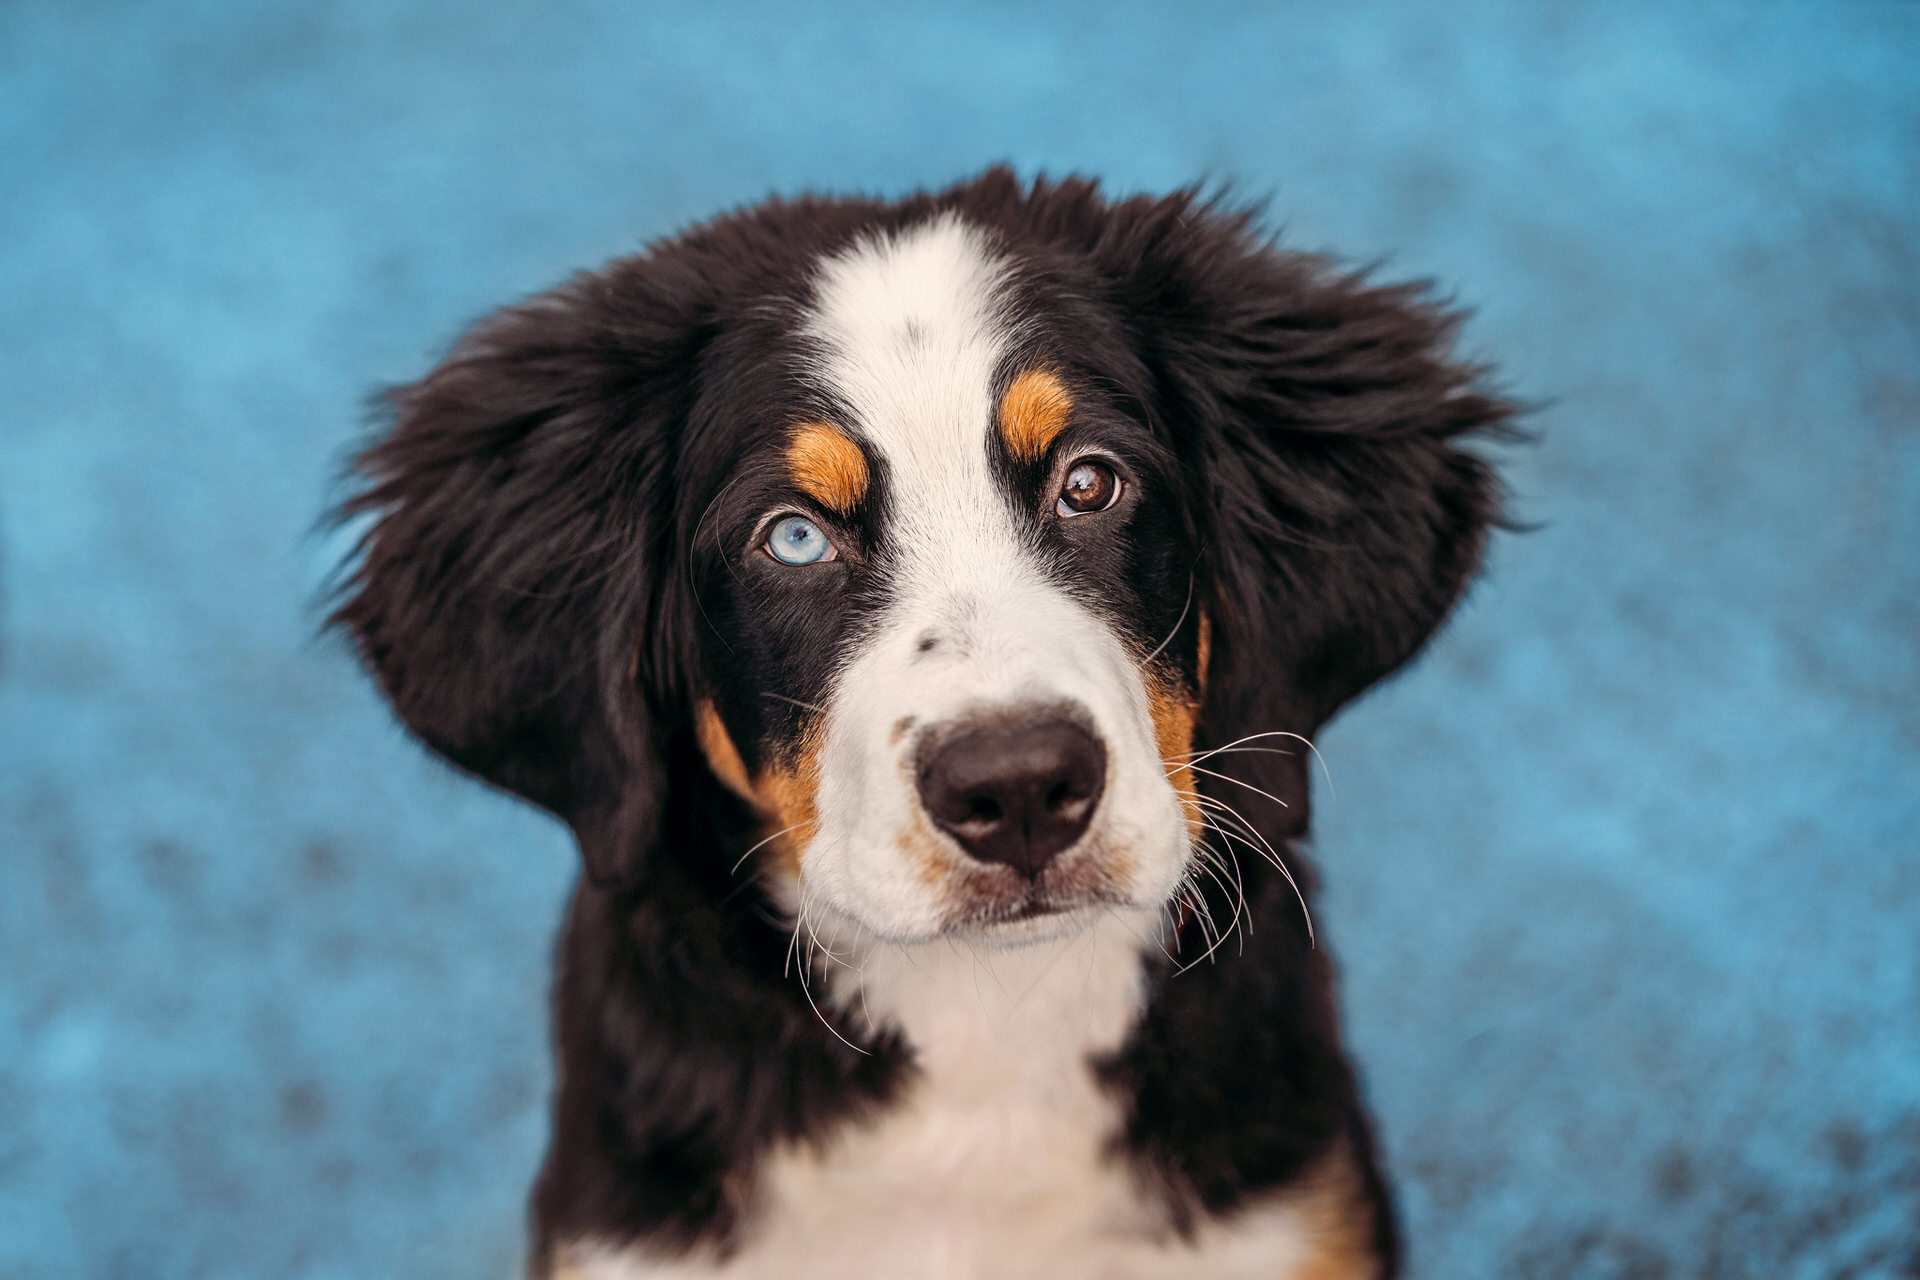 Bernese Mountain Dog puppy with one blue eye on a blue background